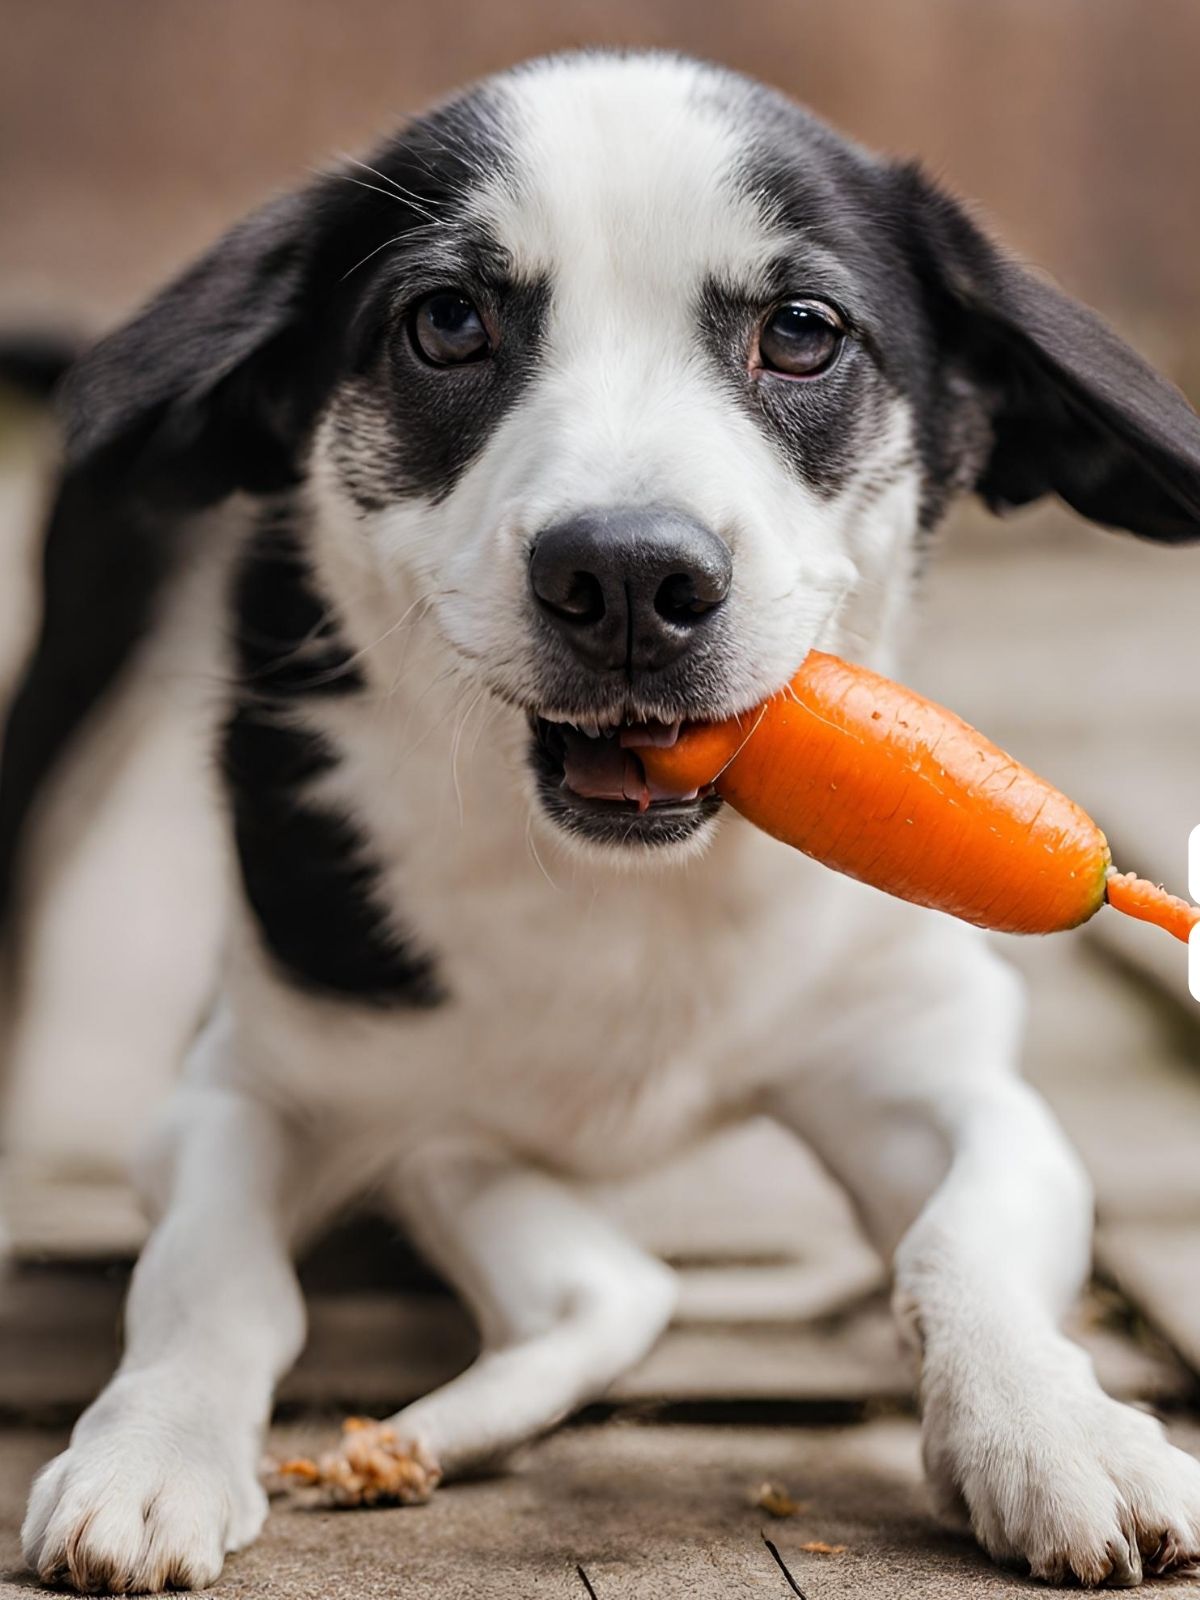 A dog with a carrot in its mouth, showcasing that dogs can eat carrots.